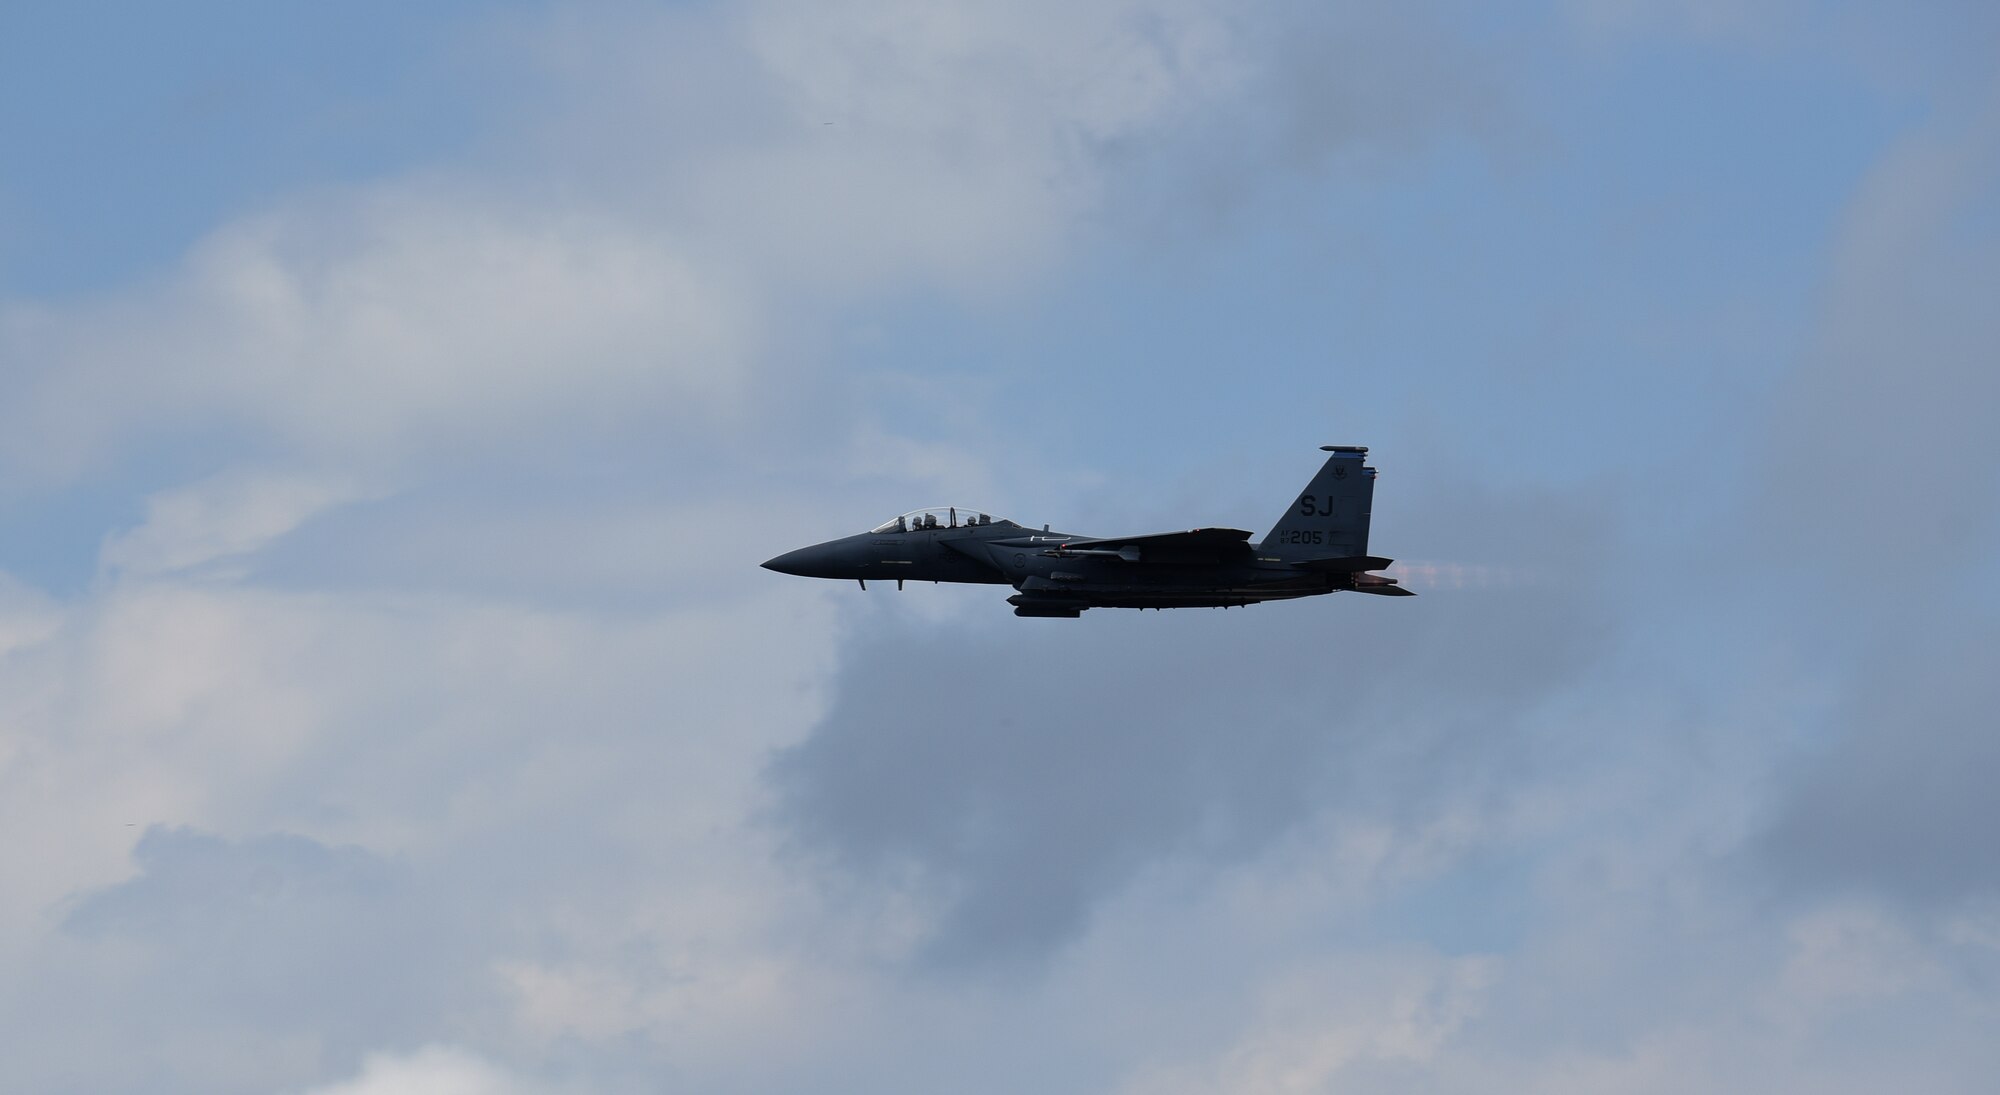 His Excellency Khalid Mohammad Al Attiyah, Qatar's Minister of State for Defense Affairs, flies in the backseat of an F-15E Strike Eagle from the 334th Fighter Squadron during a visit to learn about the aircraft’s capabilities, March 28, 2017, at Seymour Johnson Air Force Base, North Carolina. The country of Qatar is considering purchasing a fleet of F-15QA aircraft to aid a mission partner in the fight against the Islamic State of Iraq and Syria. (U.S. Air Force photo by Airman 1st Class Kenneth Boyton)